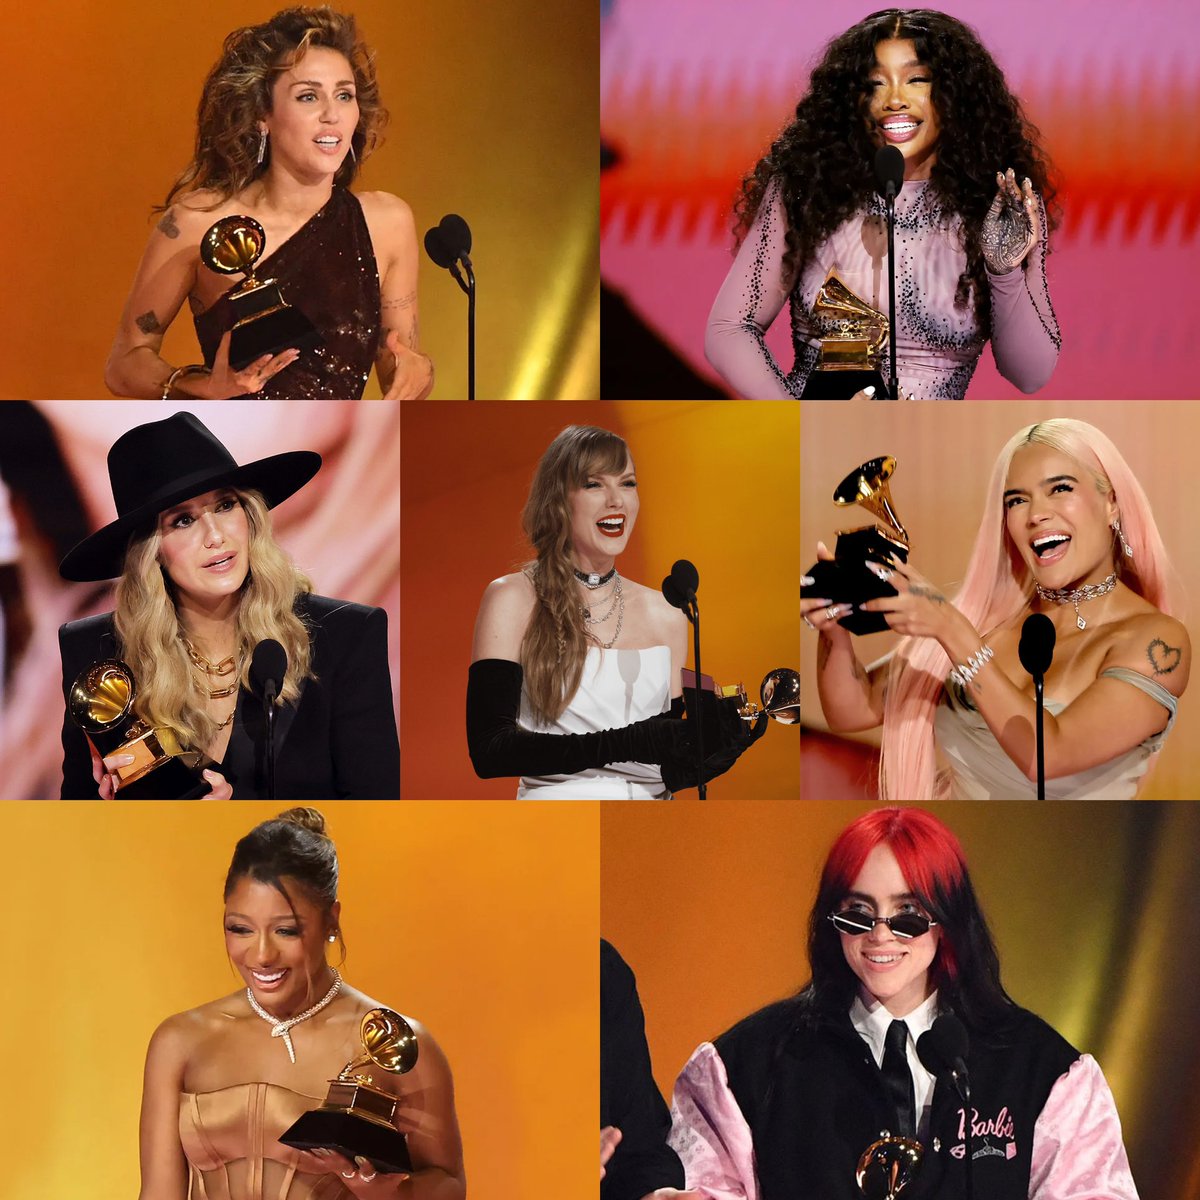 Female artists win every single category in the main telecast at the #GRAMMYs for the first time ever.